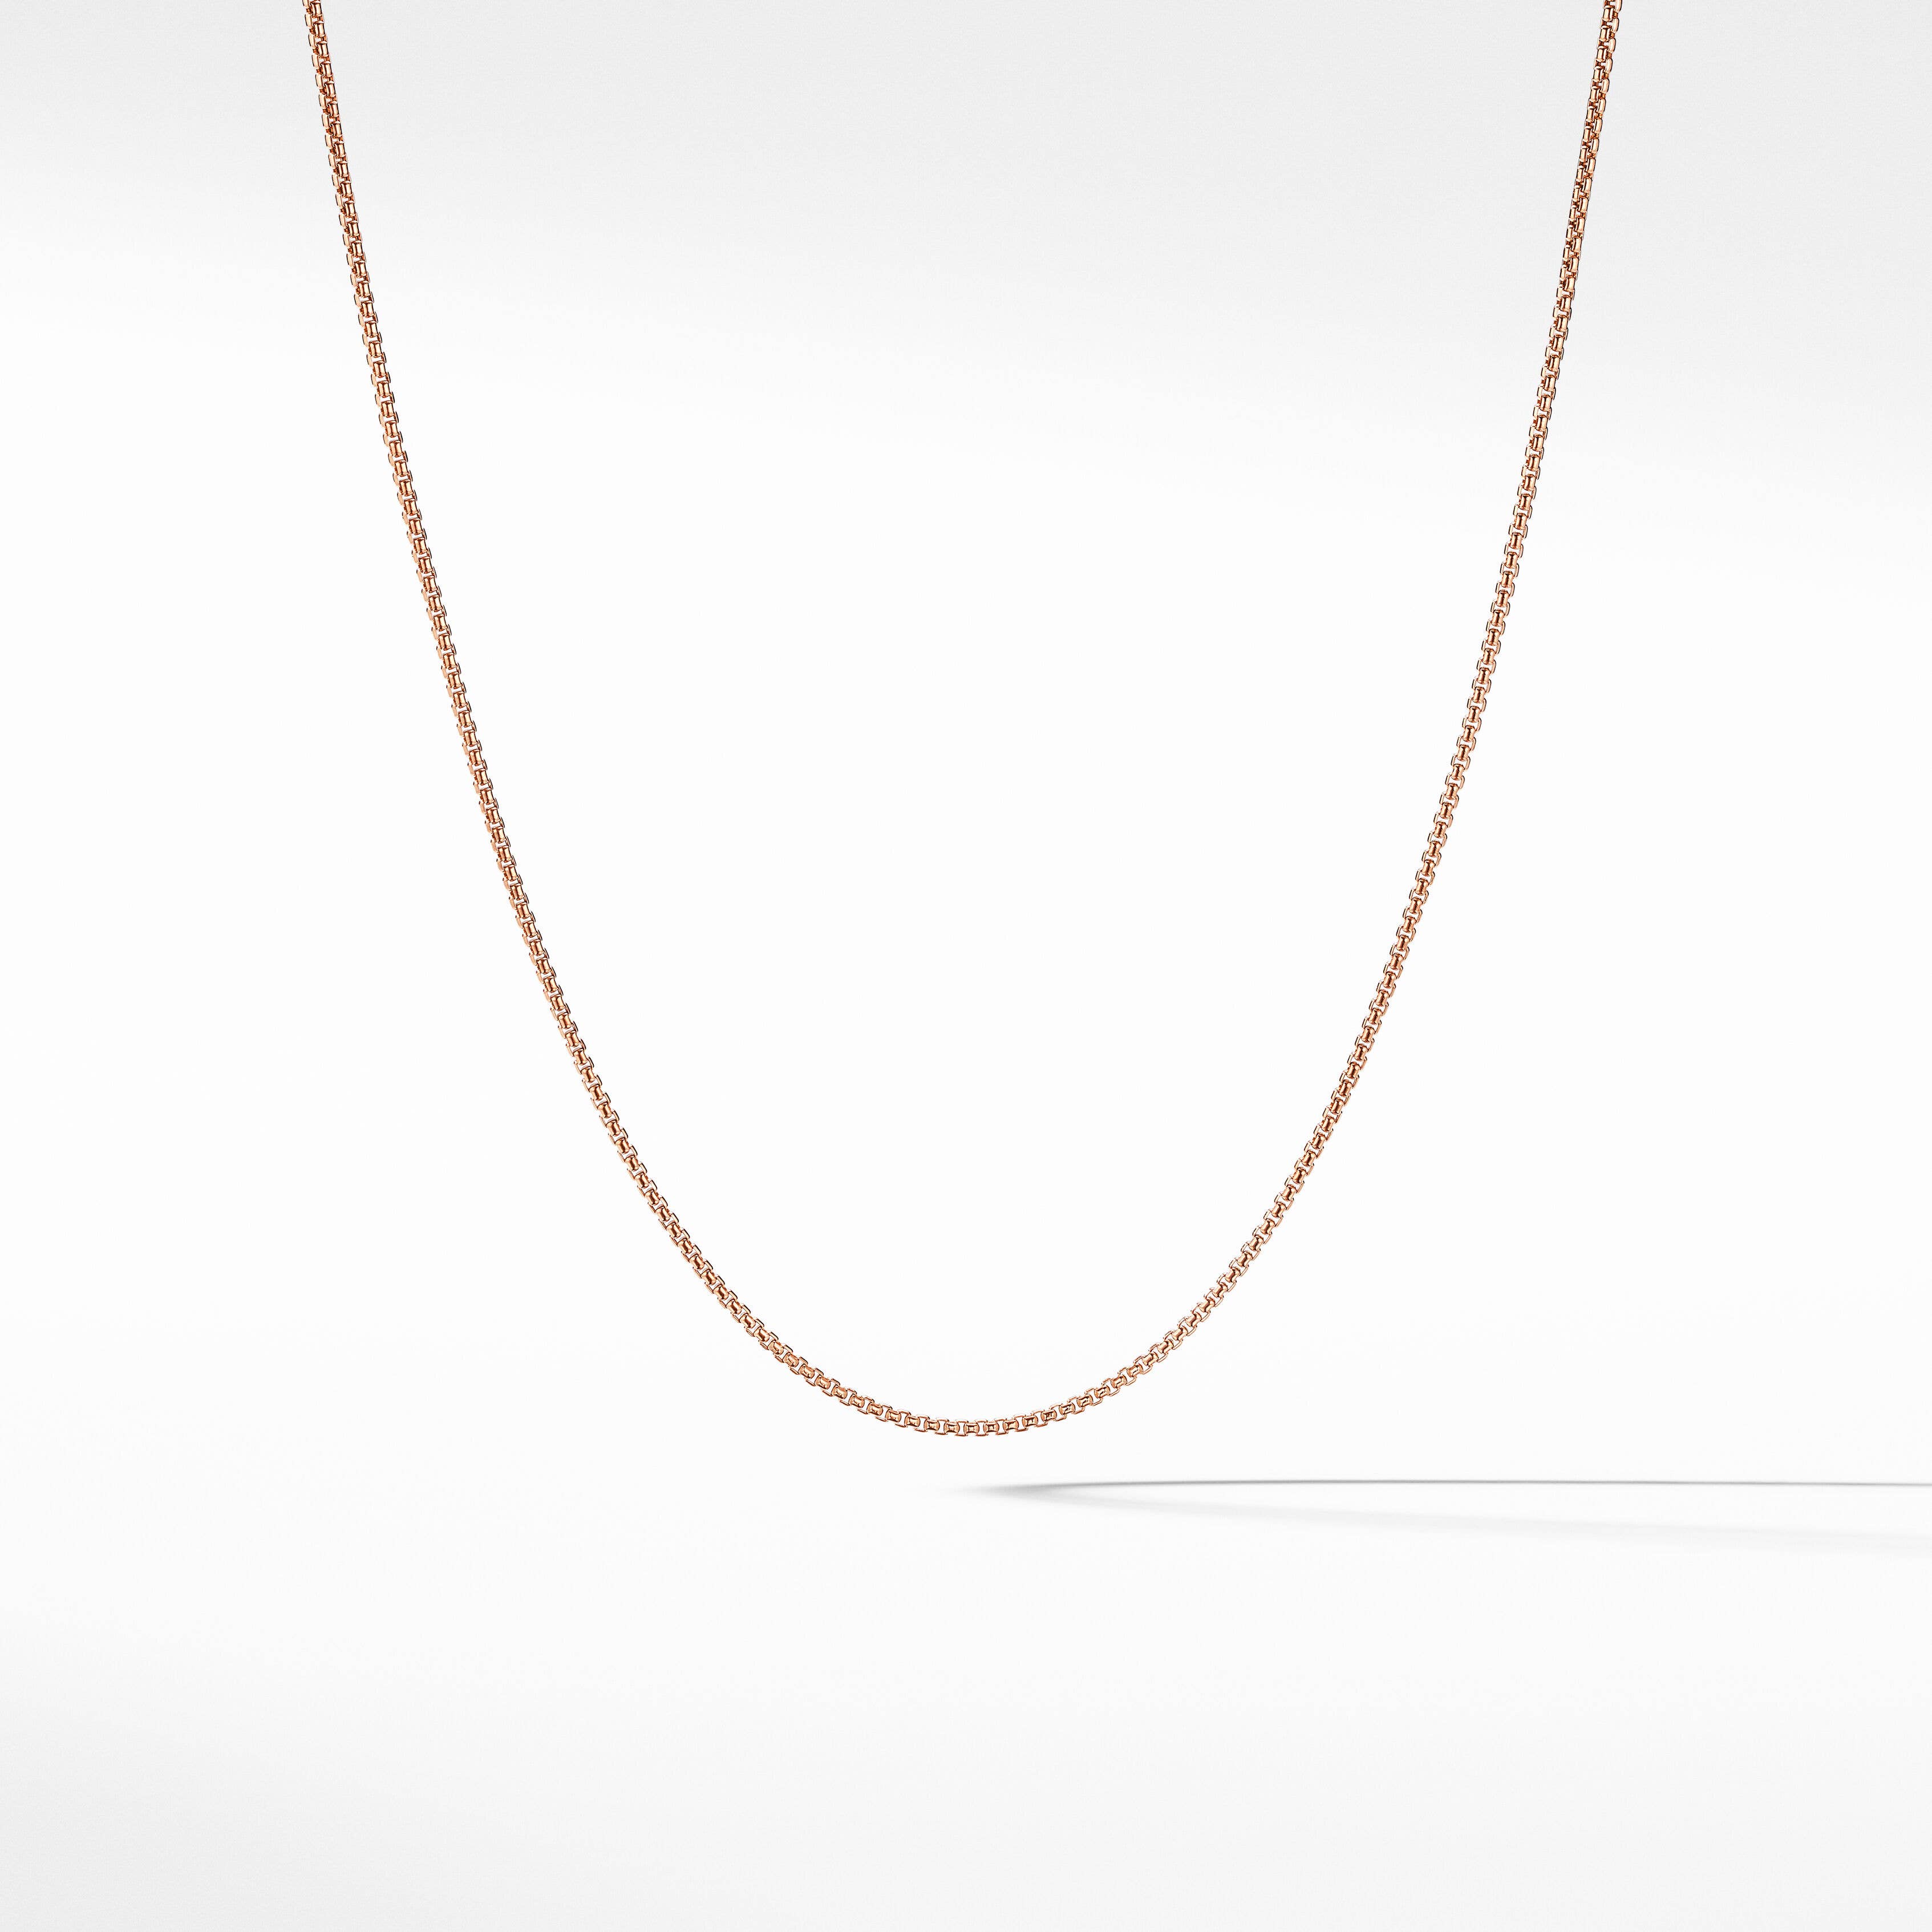 Box Chain Slider Necklace in 18K Rose Gold, 1.7mm